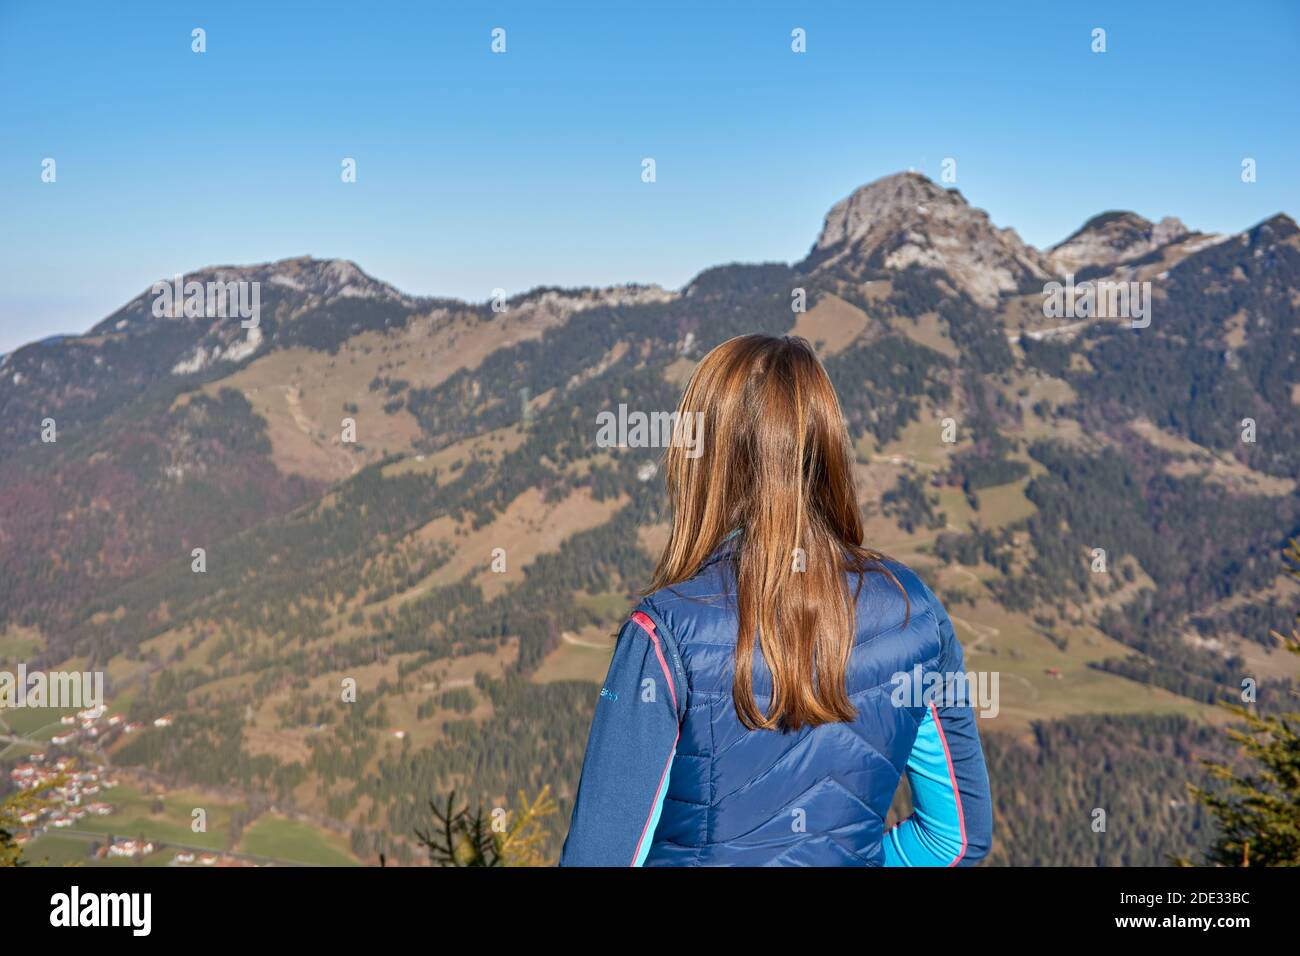 Brown haired Woman on a mountain Stock Photo